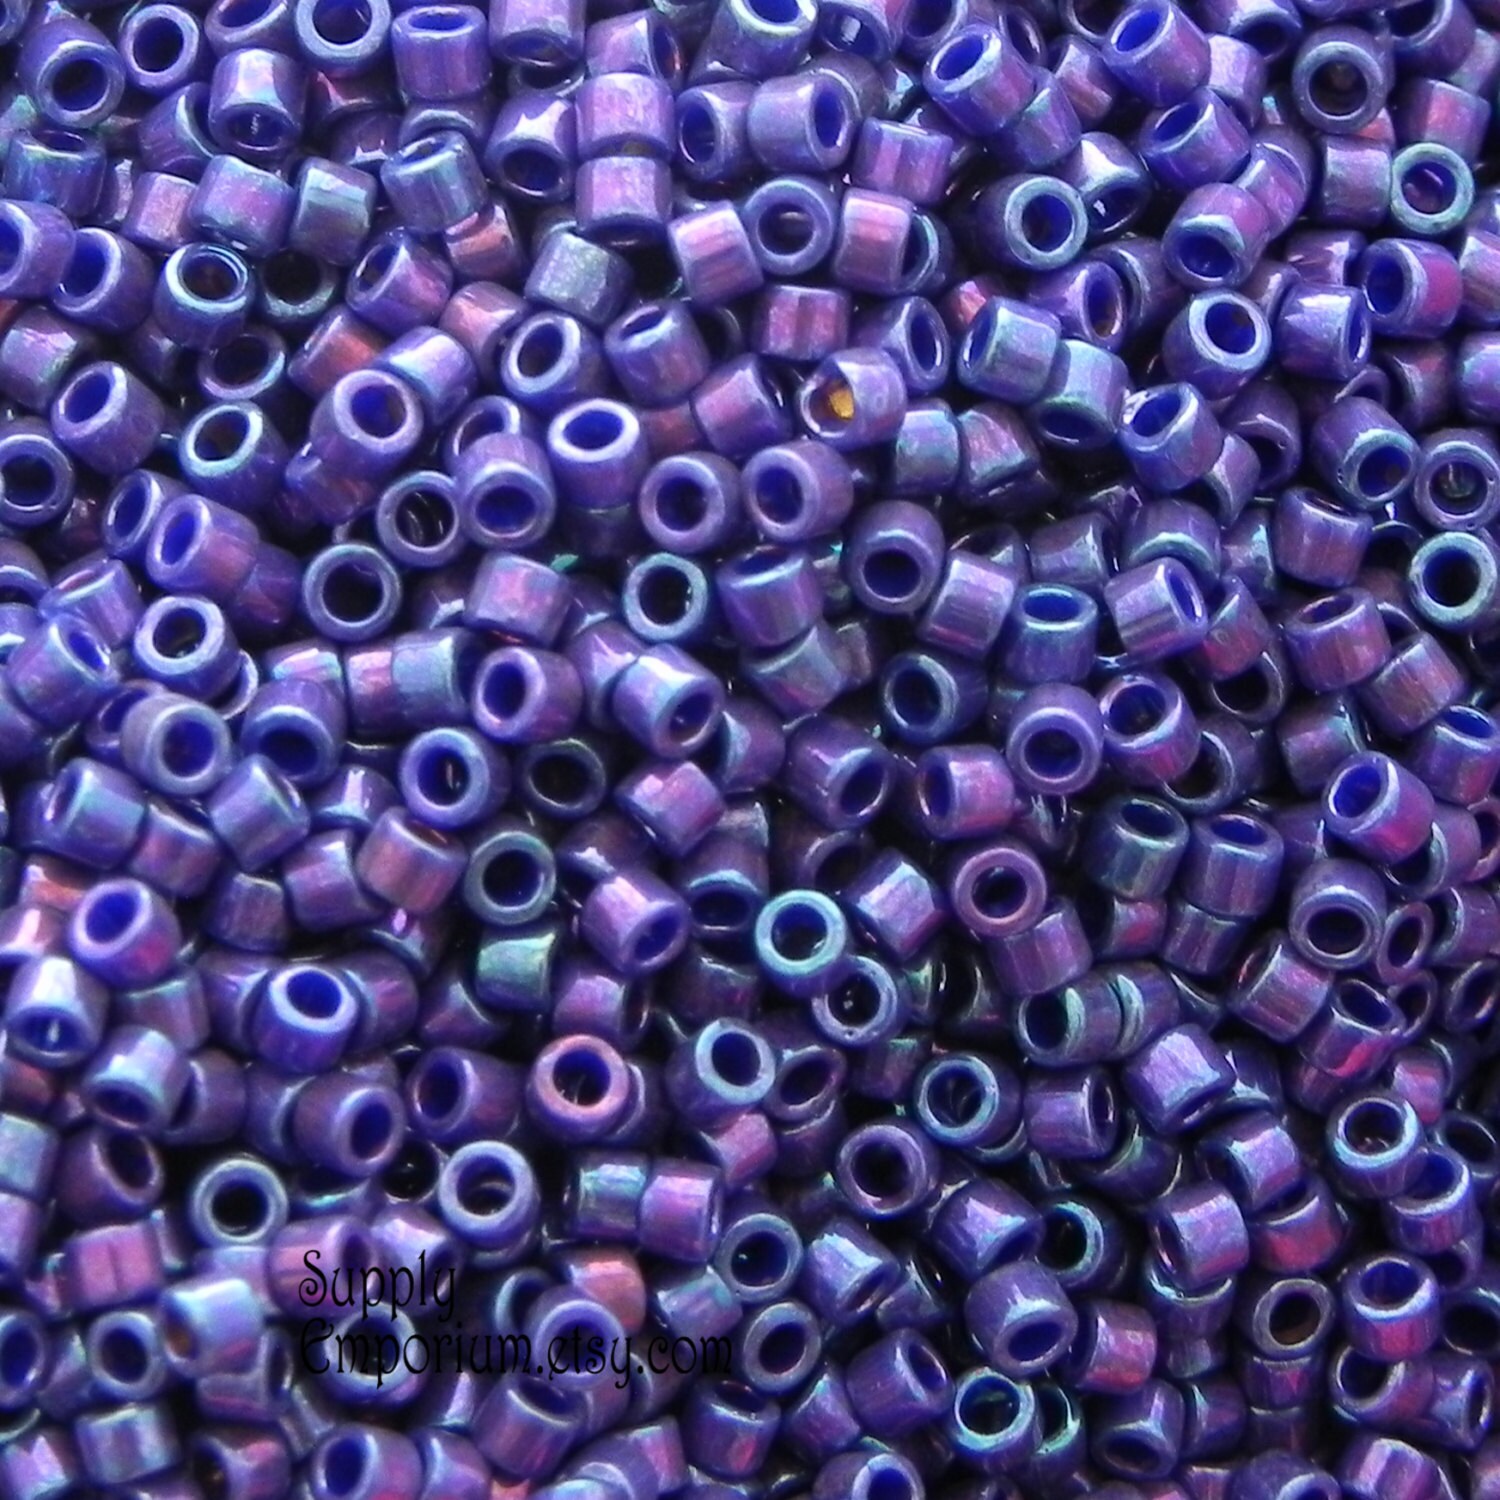 Miyuki Delica Seed Beads, 10/0 Size, Mix Lilac Mixed Light Purples (7.2  Grams)